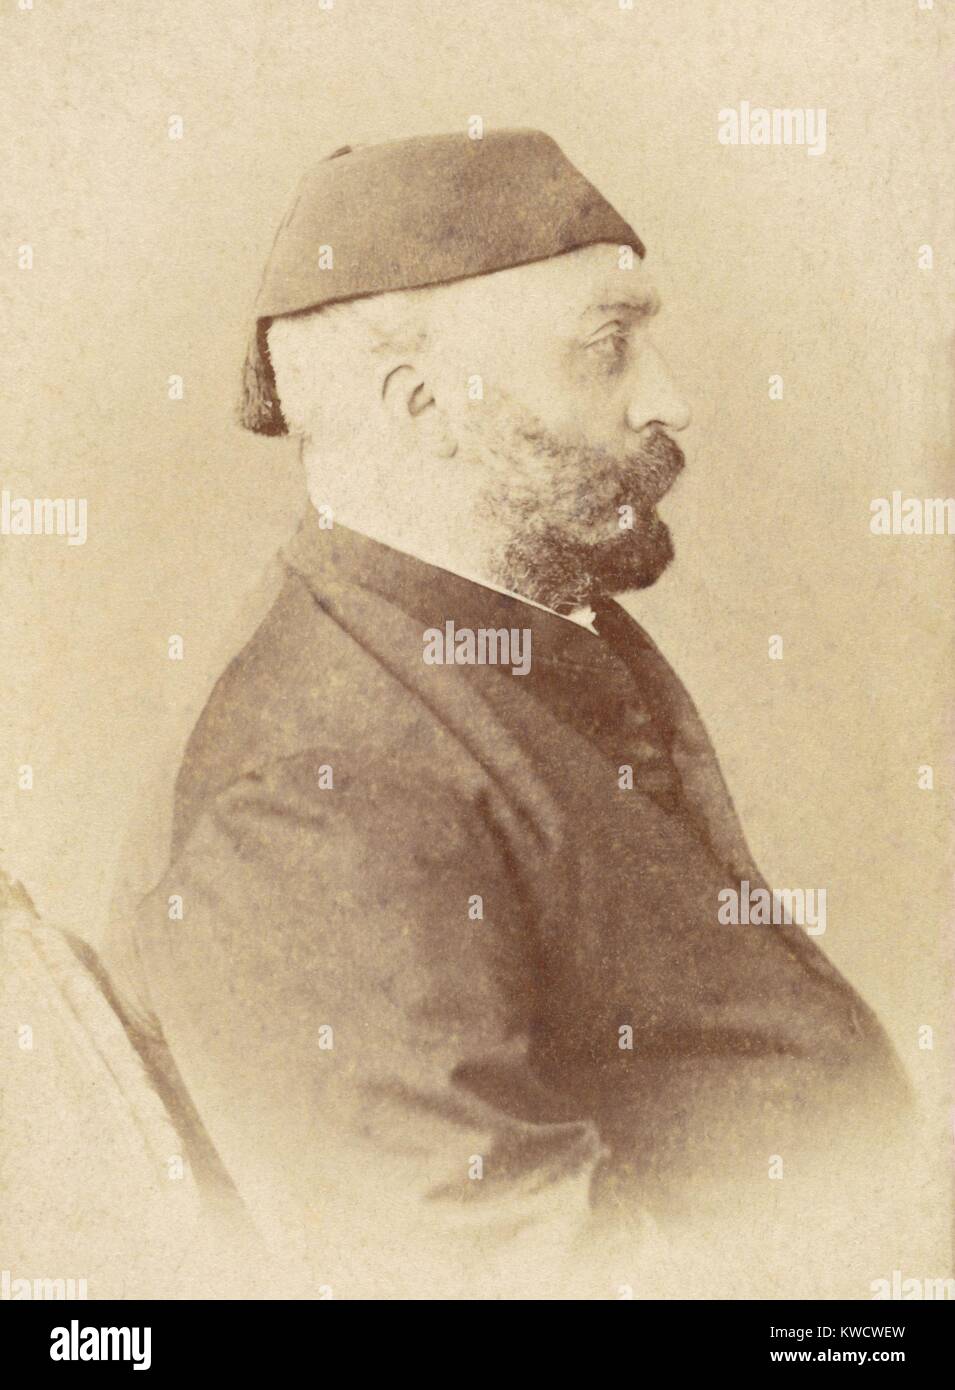 Ottoman Sultan Abdulaziz reigned from 1861 until his disposition in May 1876. Ottoman default on European loans required heavy taxes that sparked Balkan resistance and ultimately, the Russo-Turkish War 1877–78 (BSLOC 2017 1 102) Stock Photo